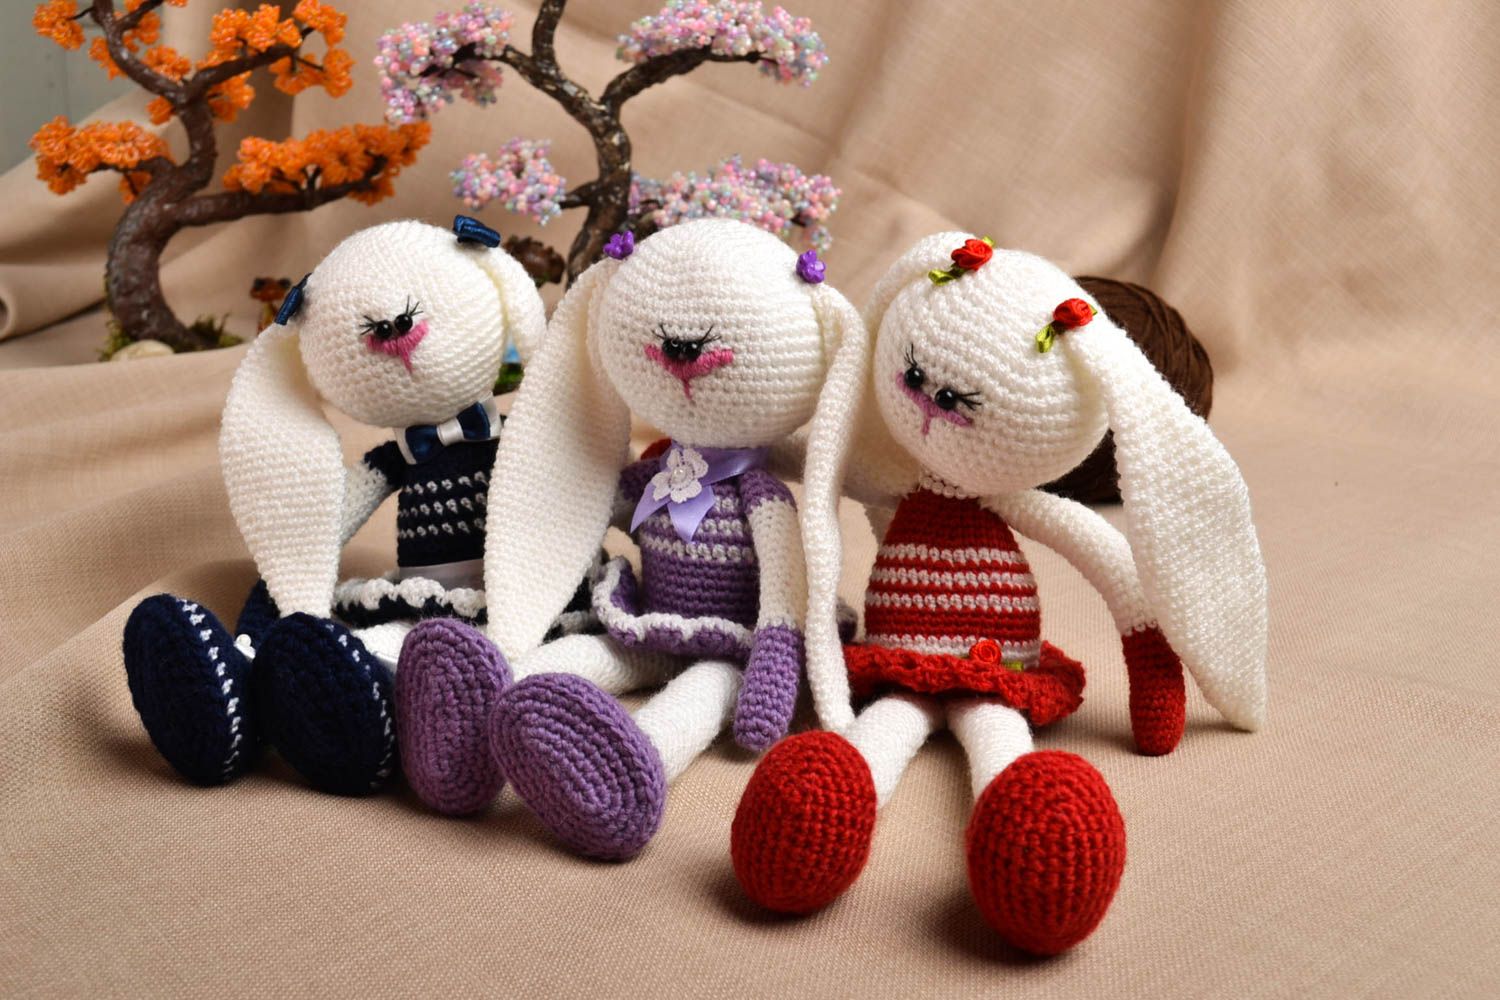 Set of three hand knitted stuffed plush rabbits in white red purple color 11,83,9 inches photo 1